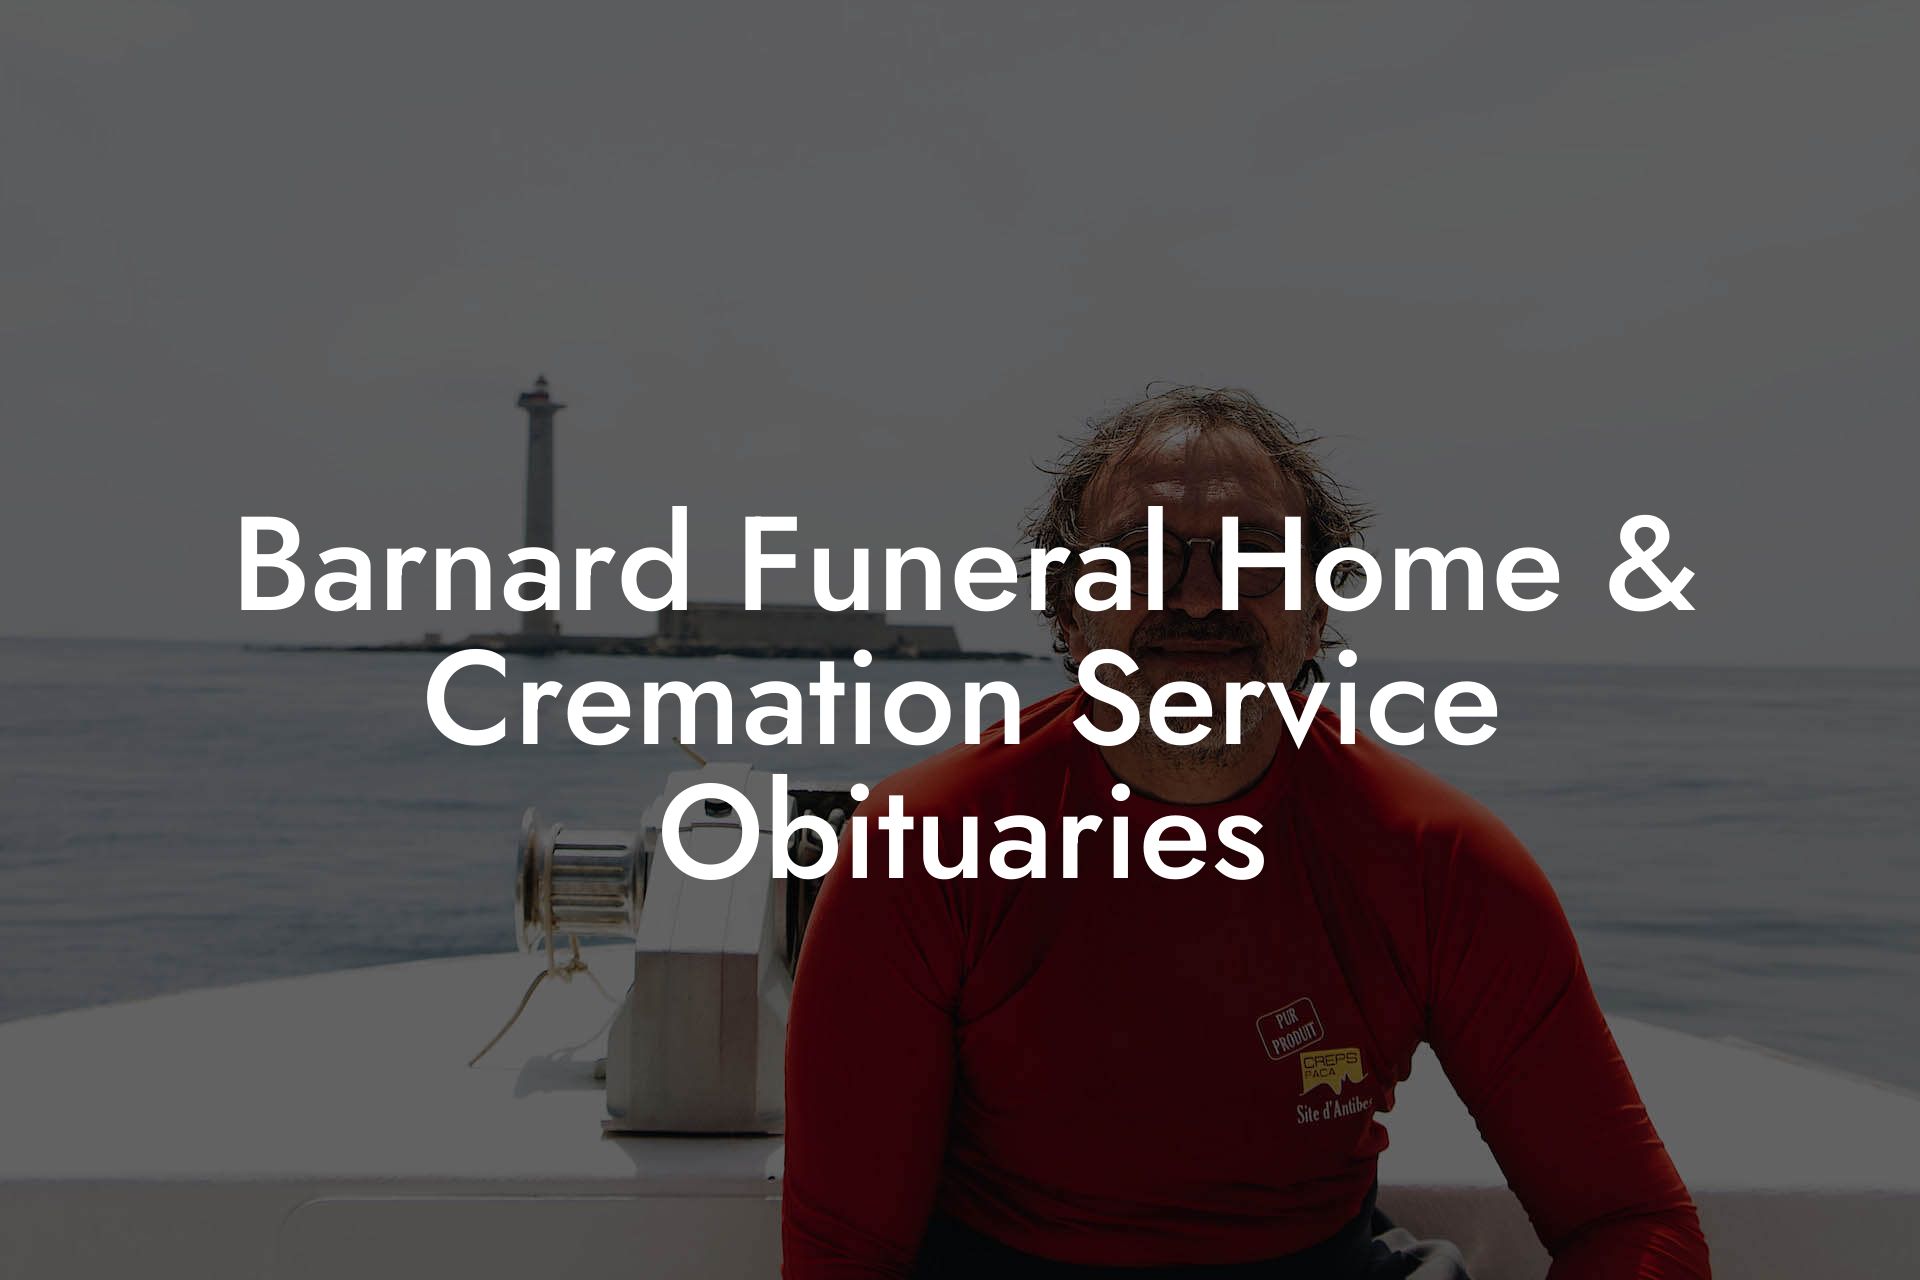 Barnard Funeral Home & Cremation Service Obituaries